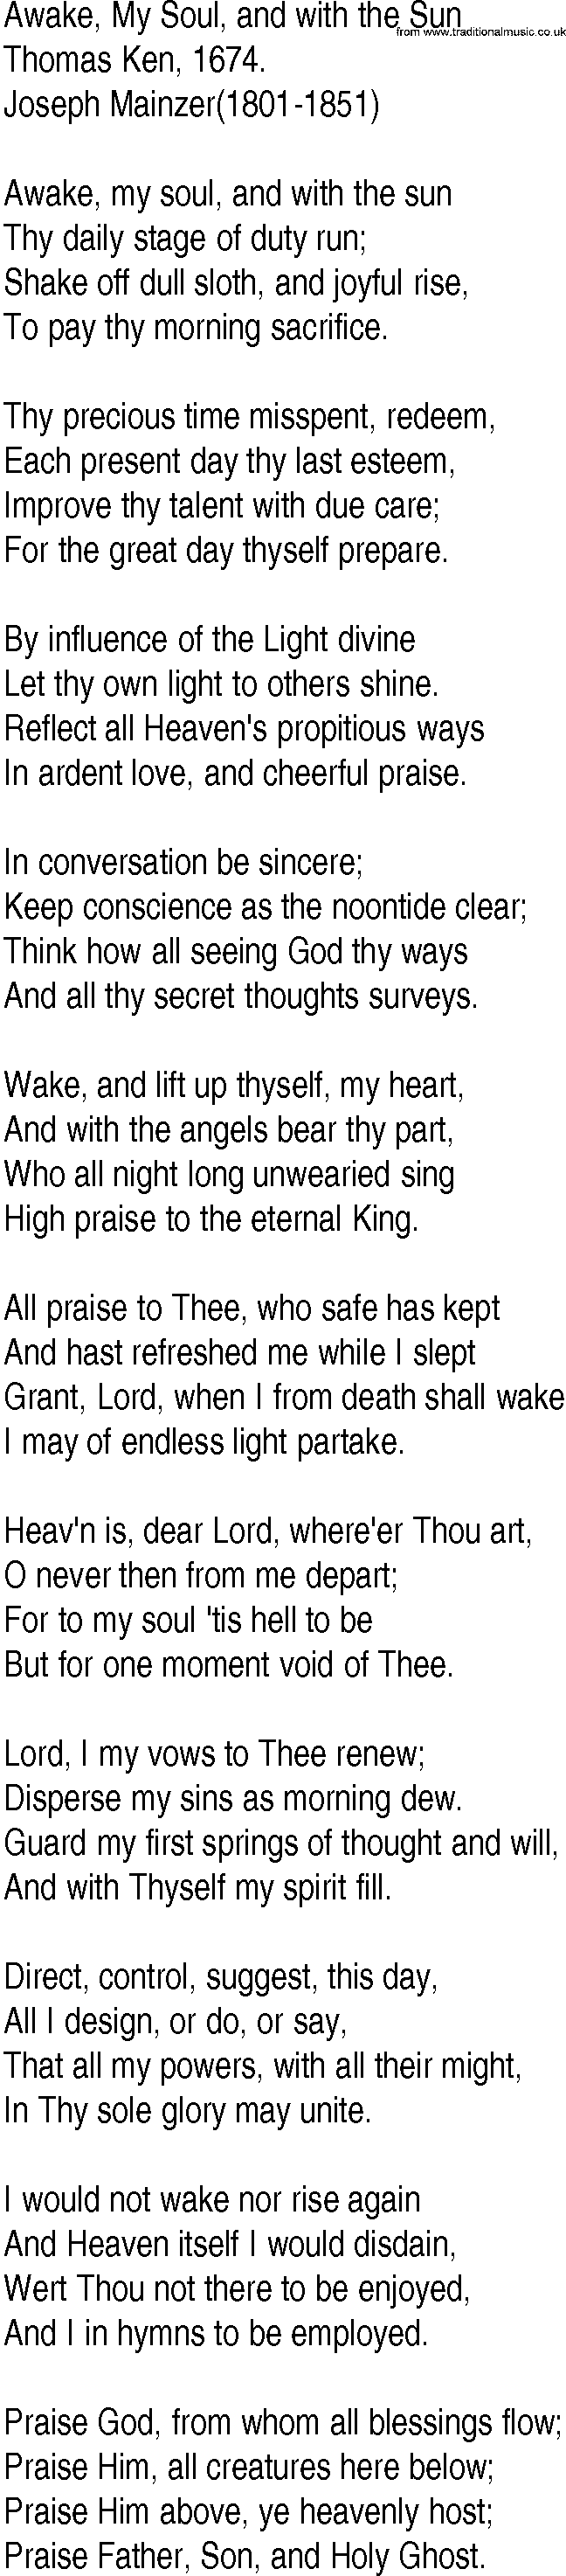 Hymn and Gospel Song: Awake, My Soul, and with the Sun by Thomas Ken lyrics